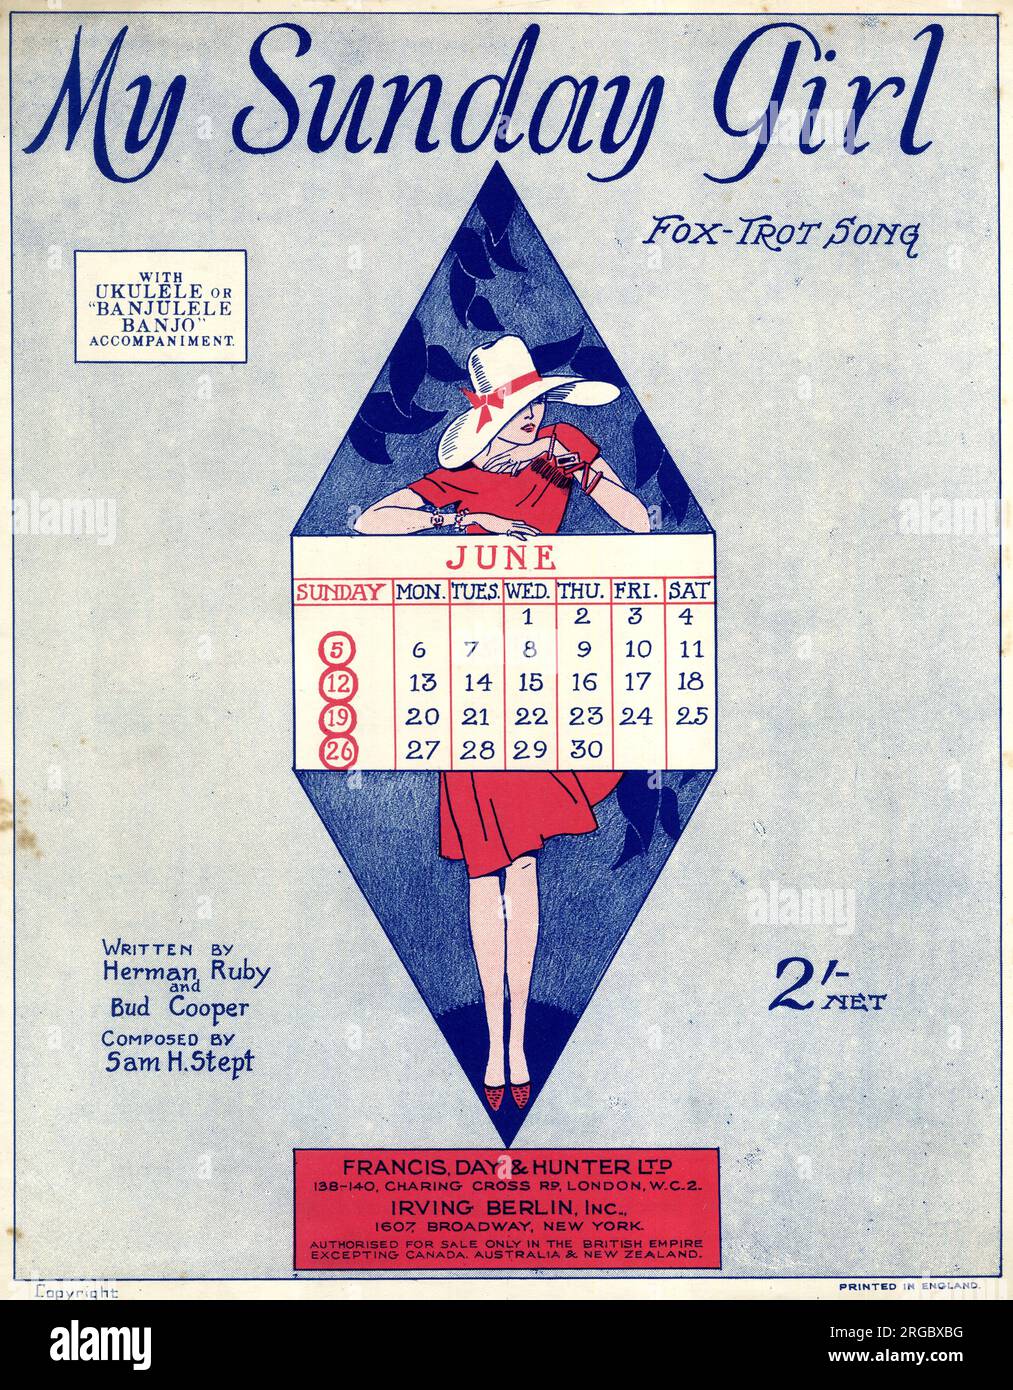 Music cover, My Sunday Girl, fox-trot song, written by Herman Ruby and Bud Cooper, composed by Sam H Stept Stock Photo